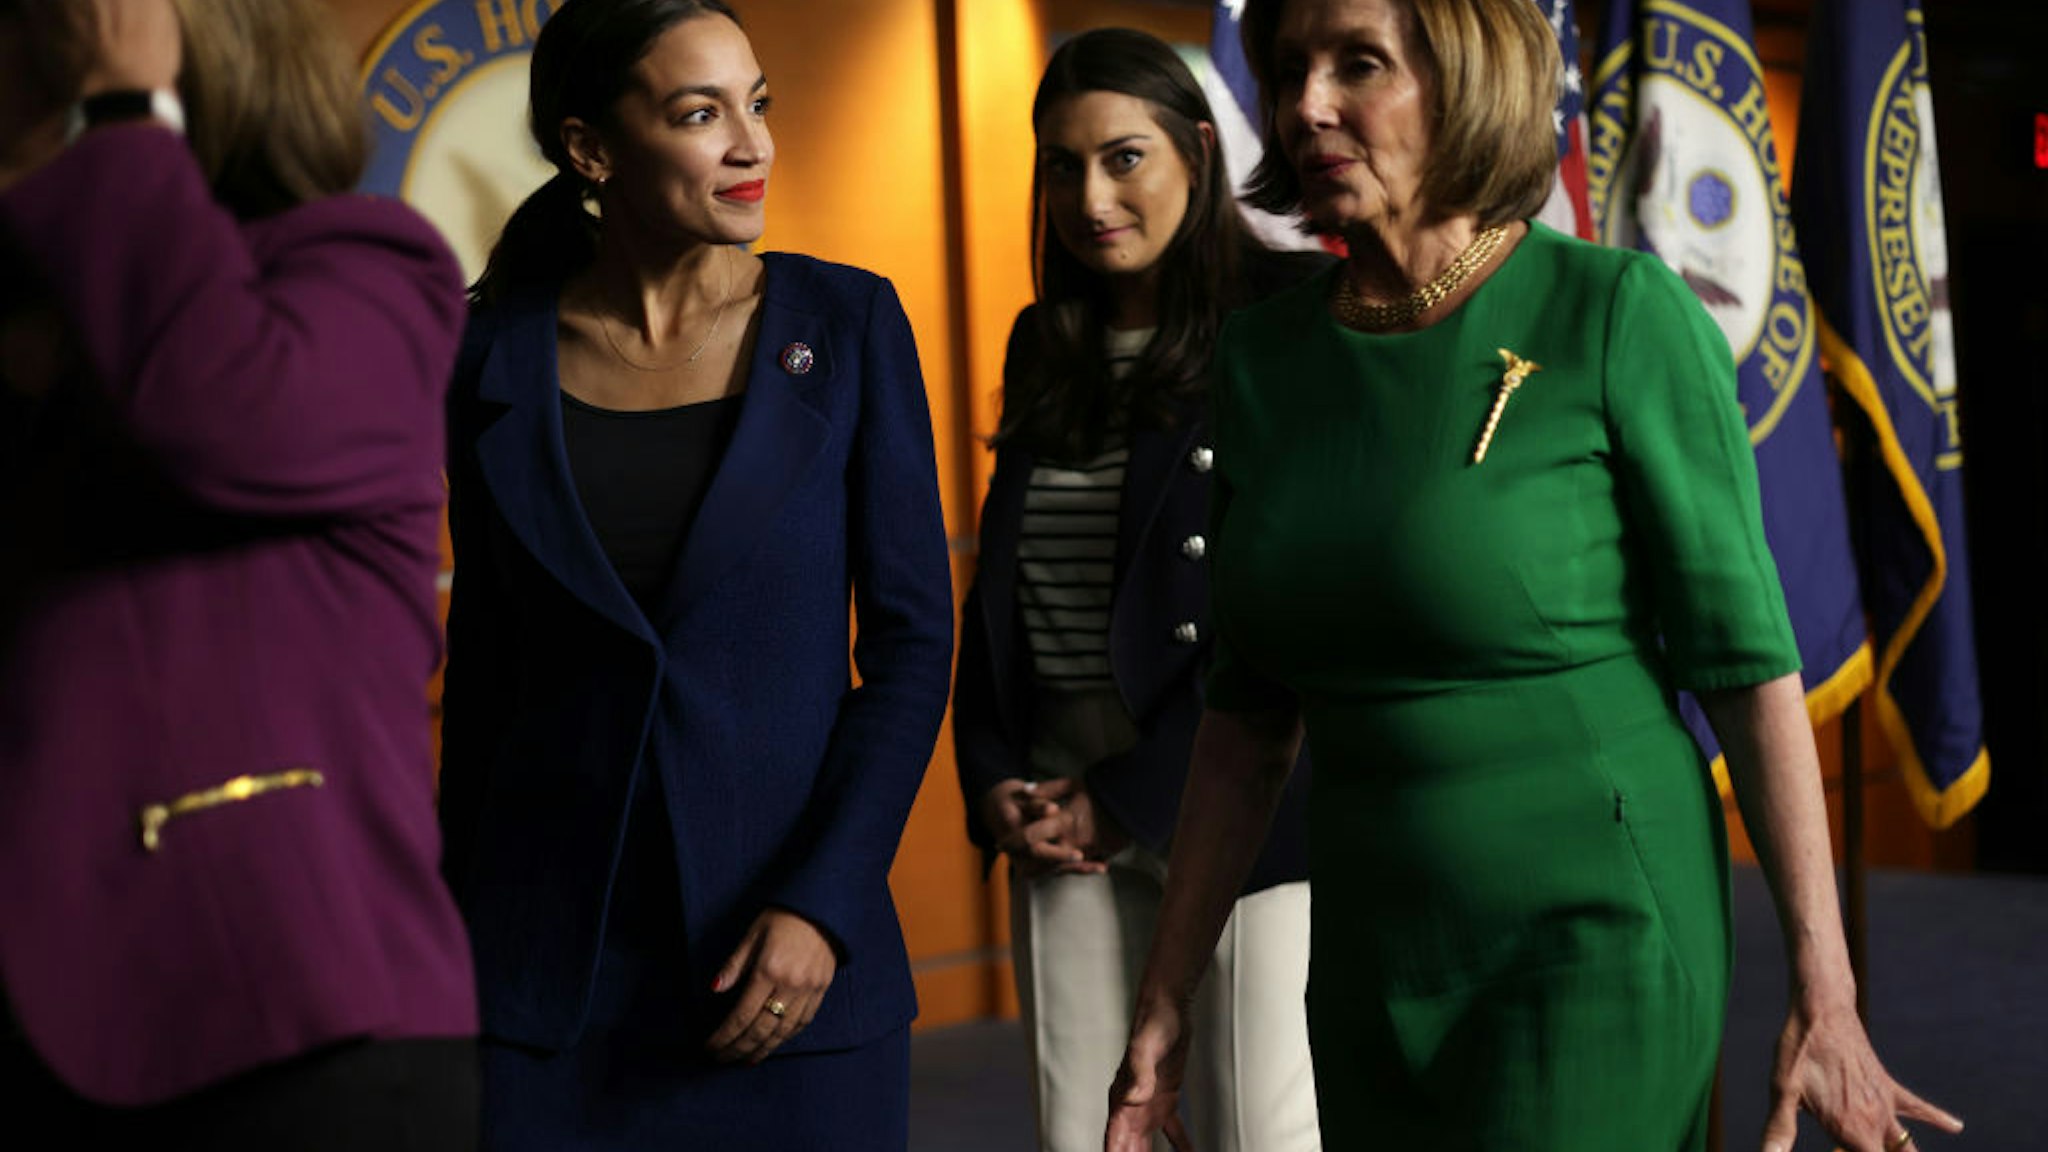 WASHINGTON, DC - JUNE 16: (L-R) U.S. Rep. Alexandria Ocasio-Cortez (D-NY), Rep. Sara Jacobs(D-CA) and Speaker of the House Rep. Nancy Pelosi (D-CA) leave after a news conference at the U.S. Capitol June 16, 2021 in Washington, DC. Speaker Pelosi held a news conference to announce members of the newly established Select Committee on Economic Disparity and Fairness in Growth.